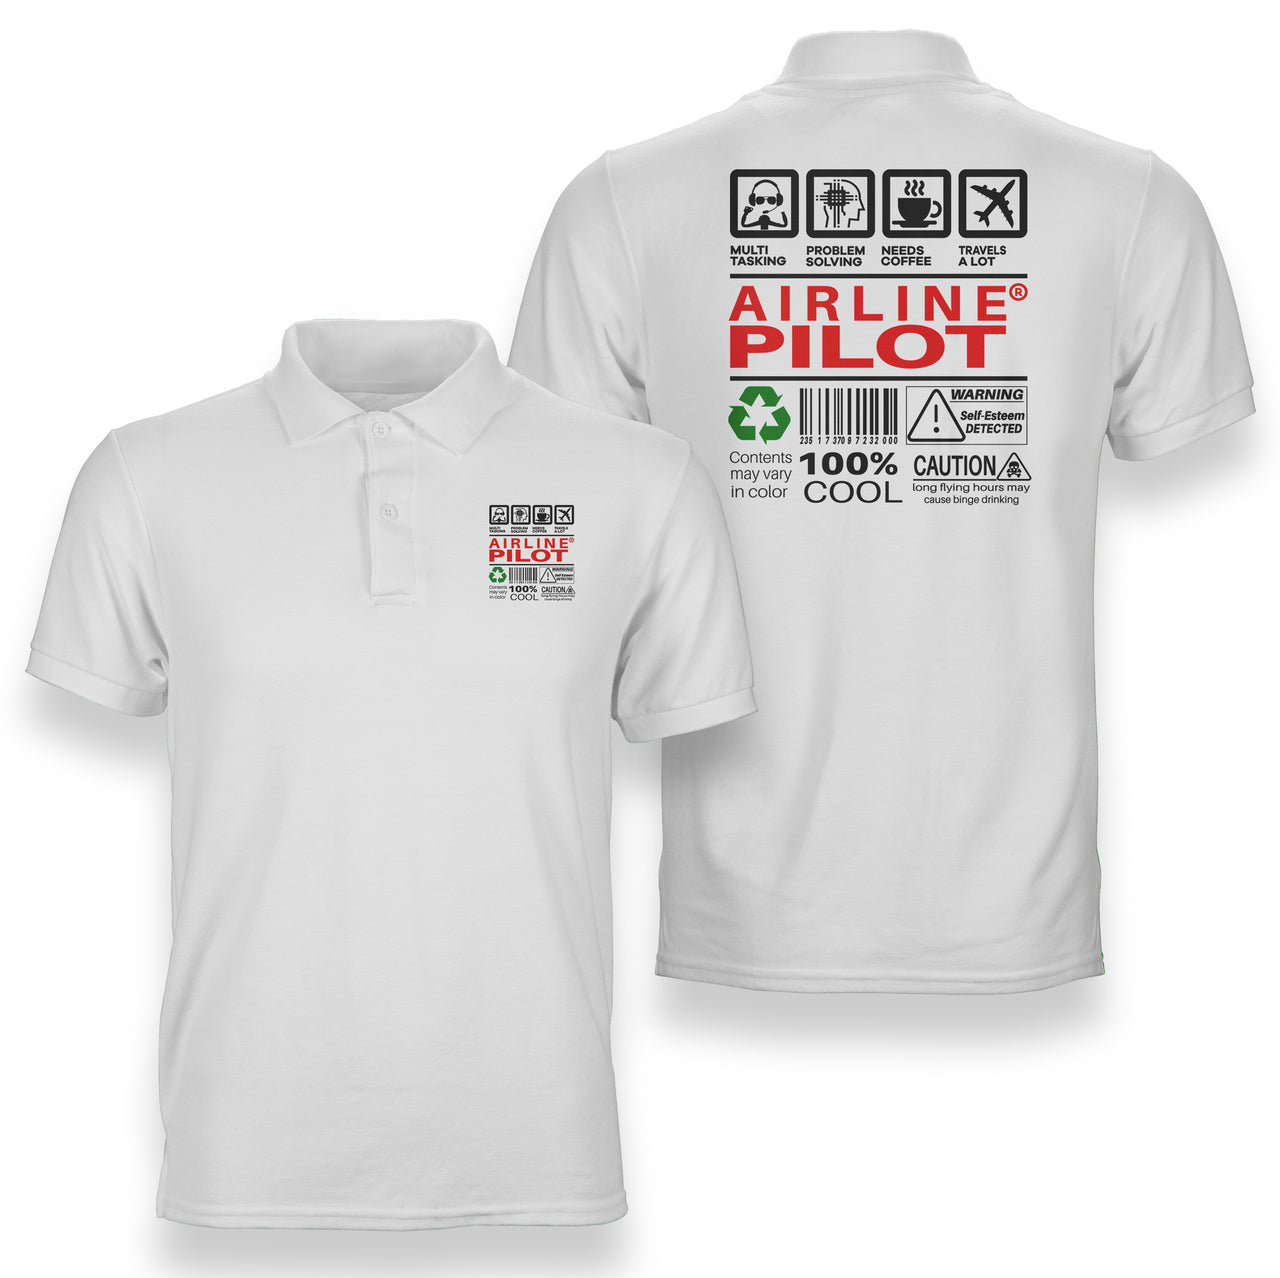 Airline Pilot Label Designed Double Side Polo T-Shirts